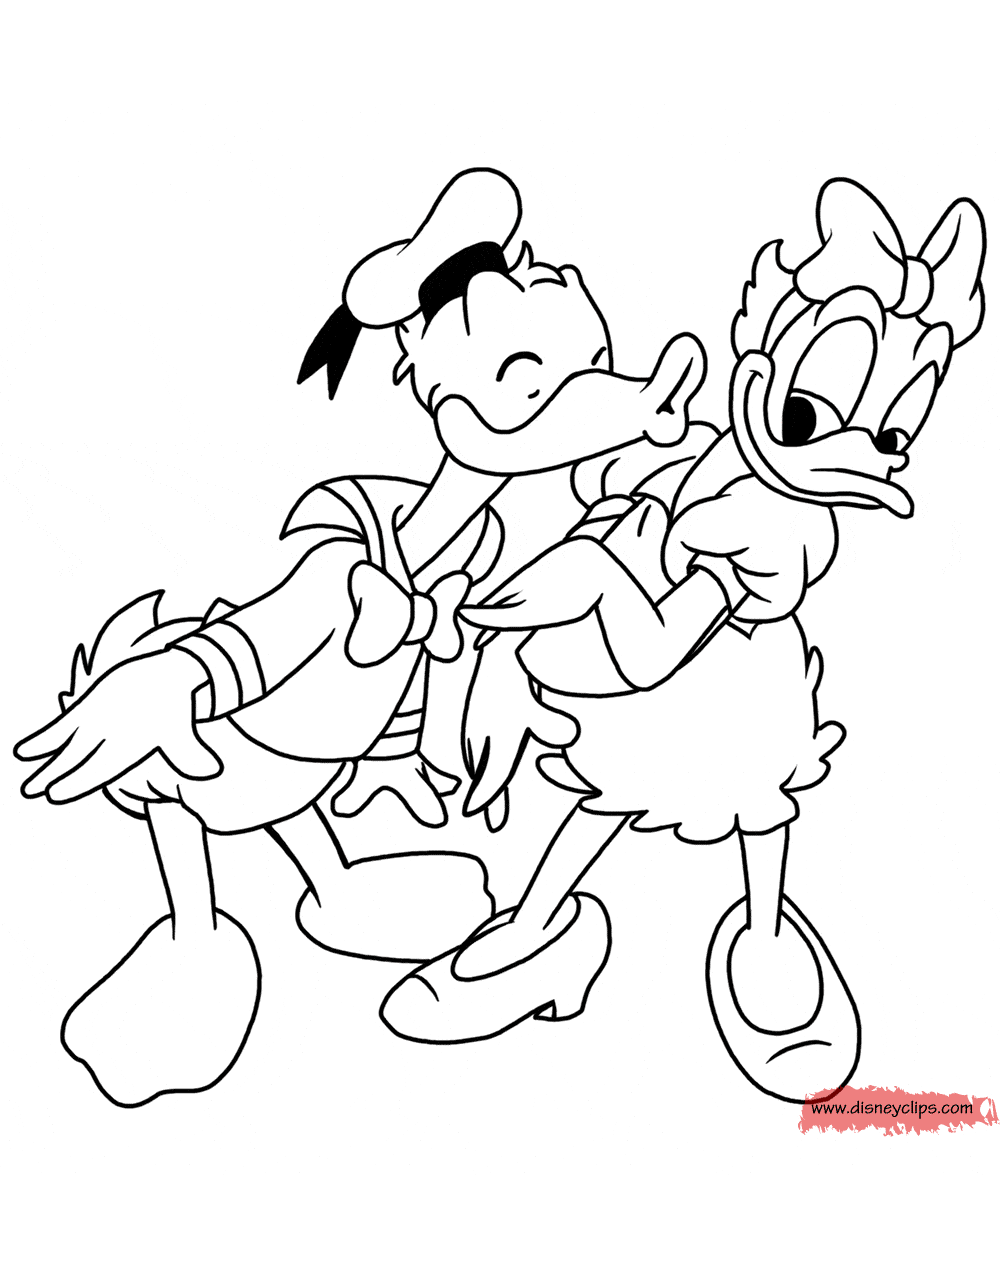 donald and daisy coloring pages daisy duck coloring pages kidsuki and coloring daisy donald pages 